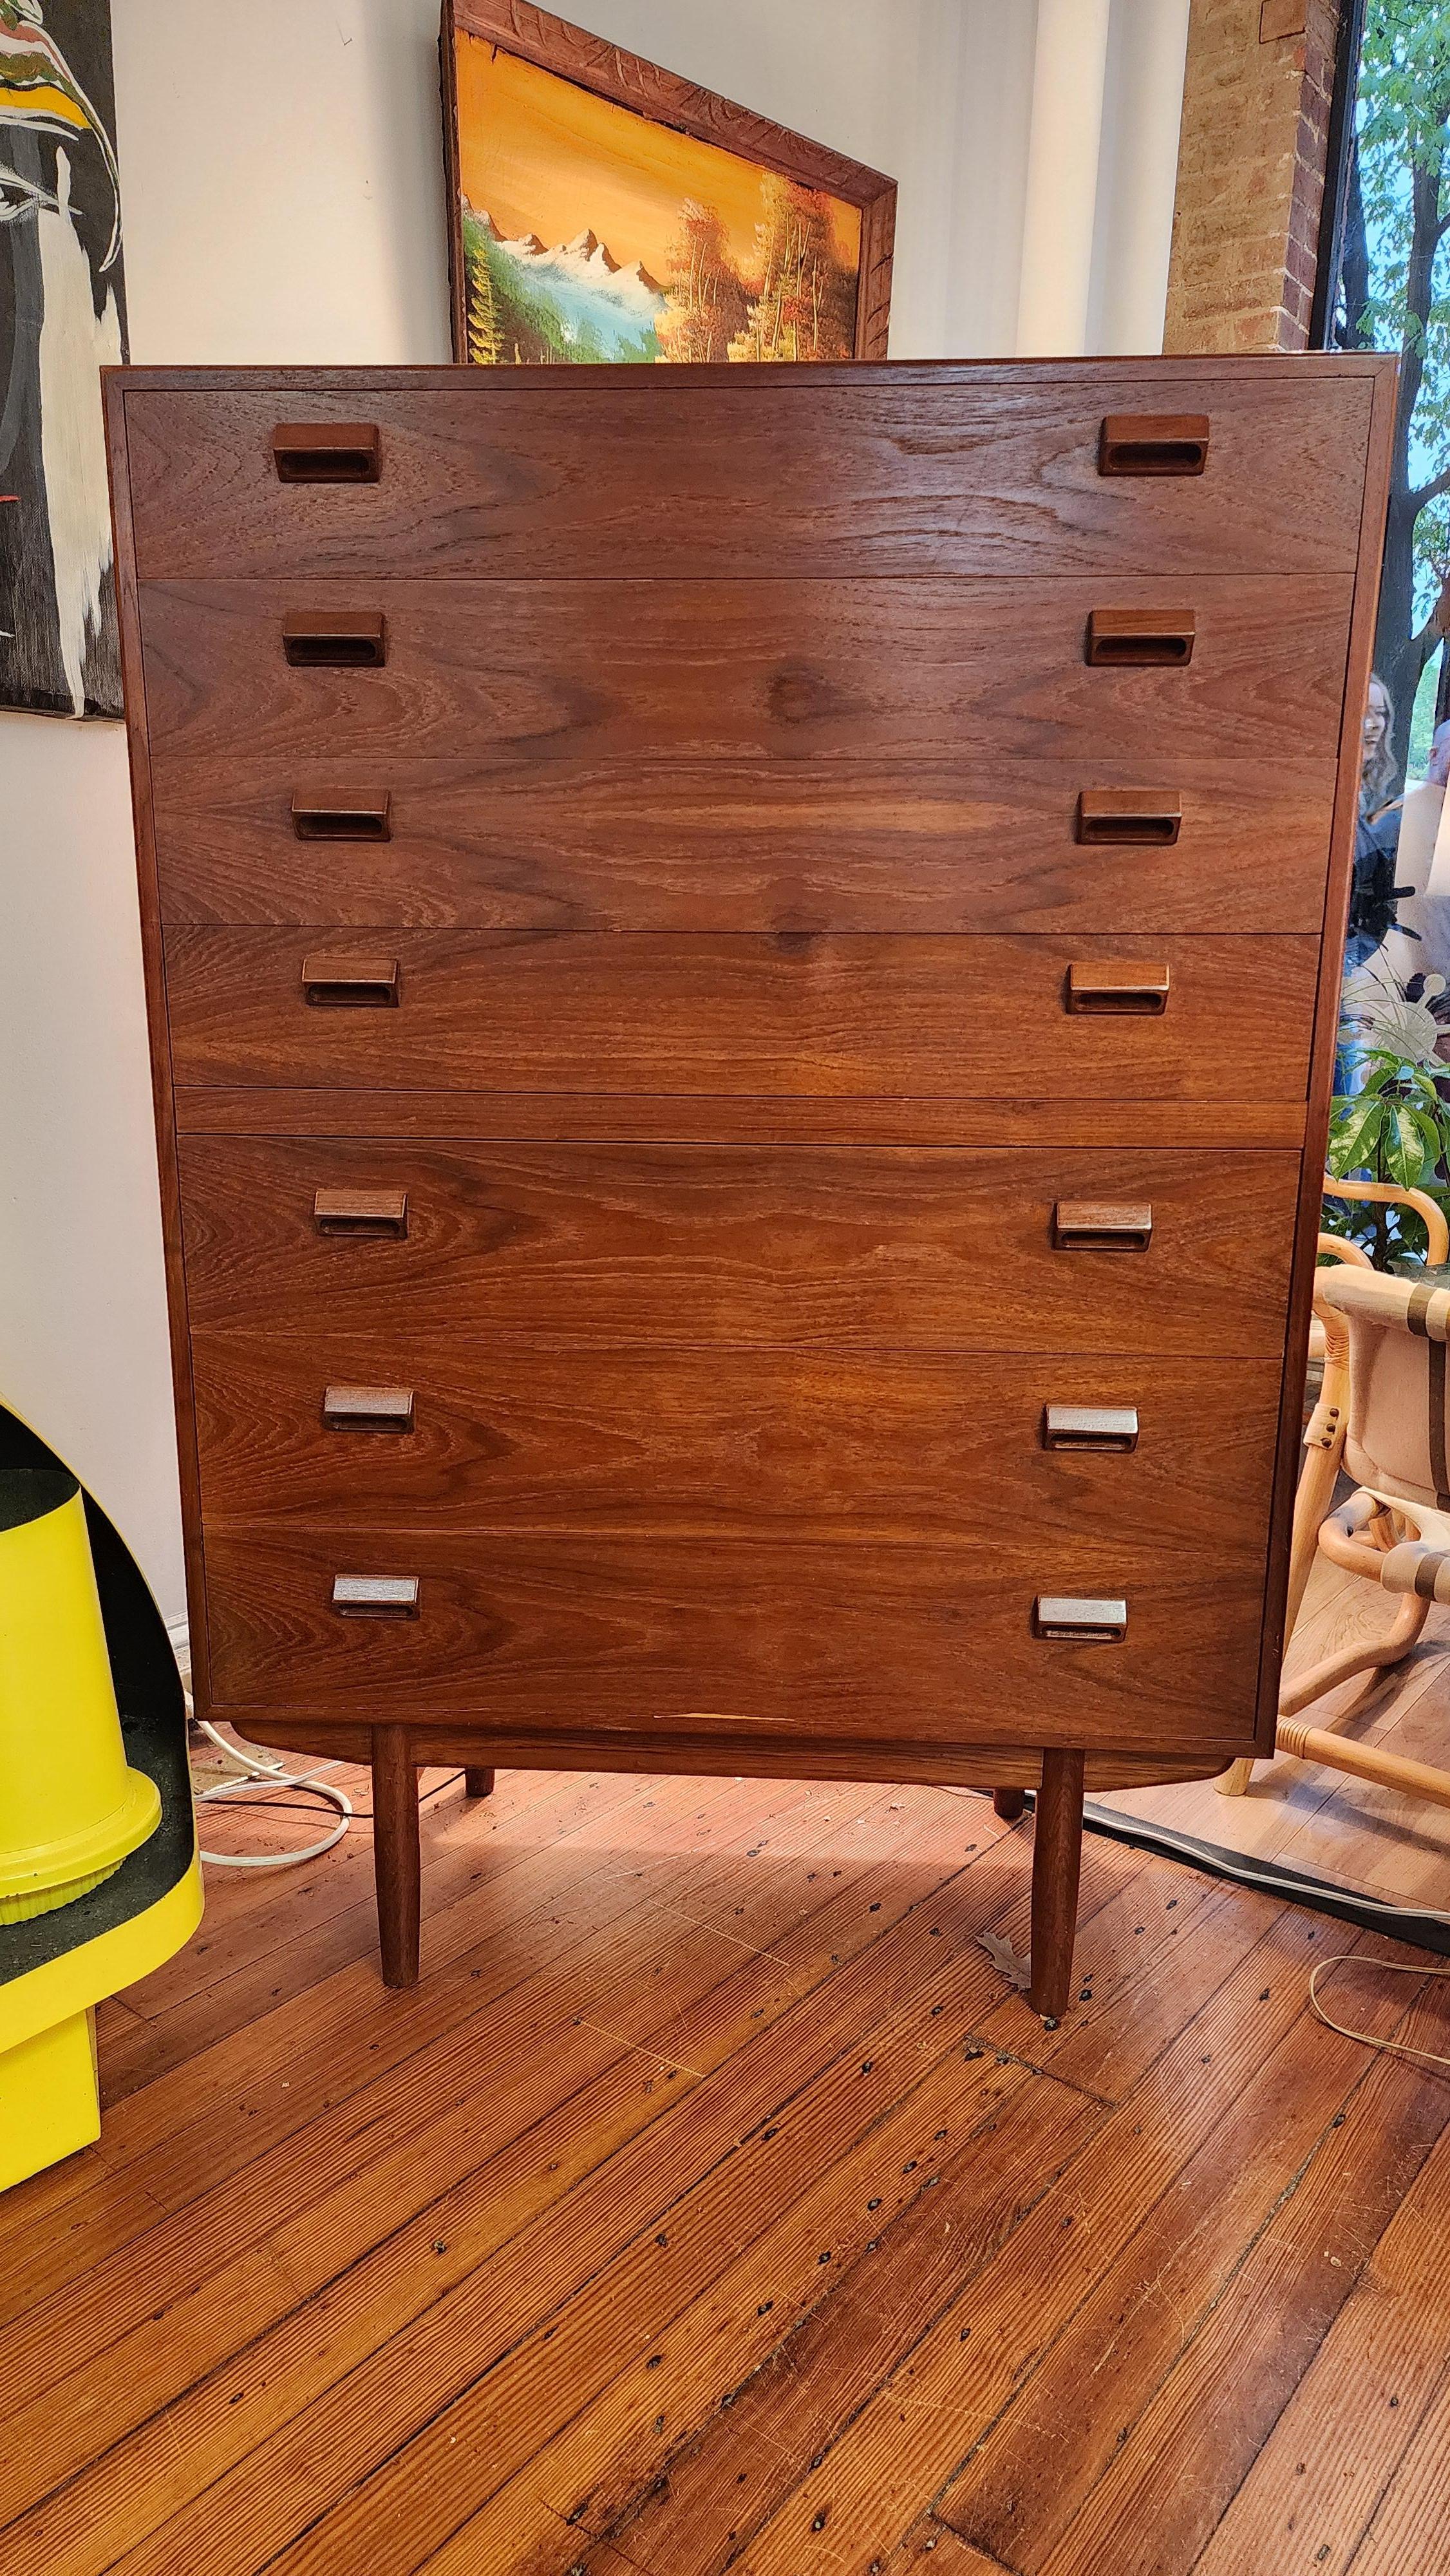 This massive Danish teak tall chest was designed by Borge Mogensen, one of the most important designers in Danish Modern furniture. This dresser was owned by the same family, who purchased it be in the 1960s, until it was entrusted with us. 
It or